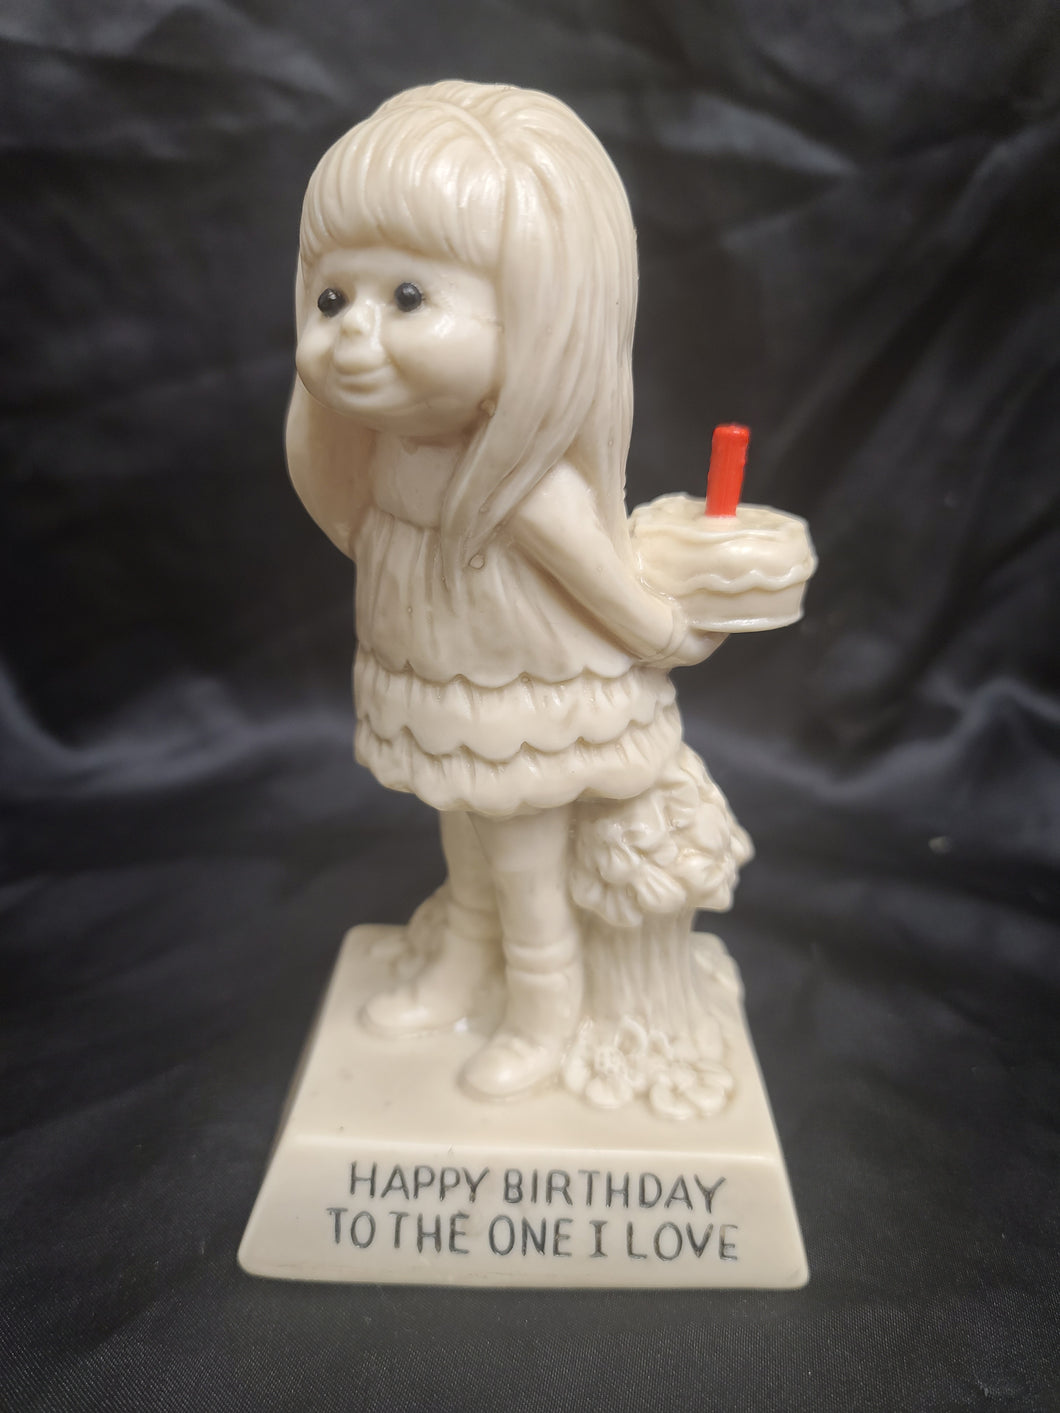 Happy Birthday To The One I Love Figurine 1971 W & R Berries Co Good condition, no chips or cracks